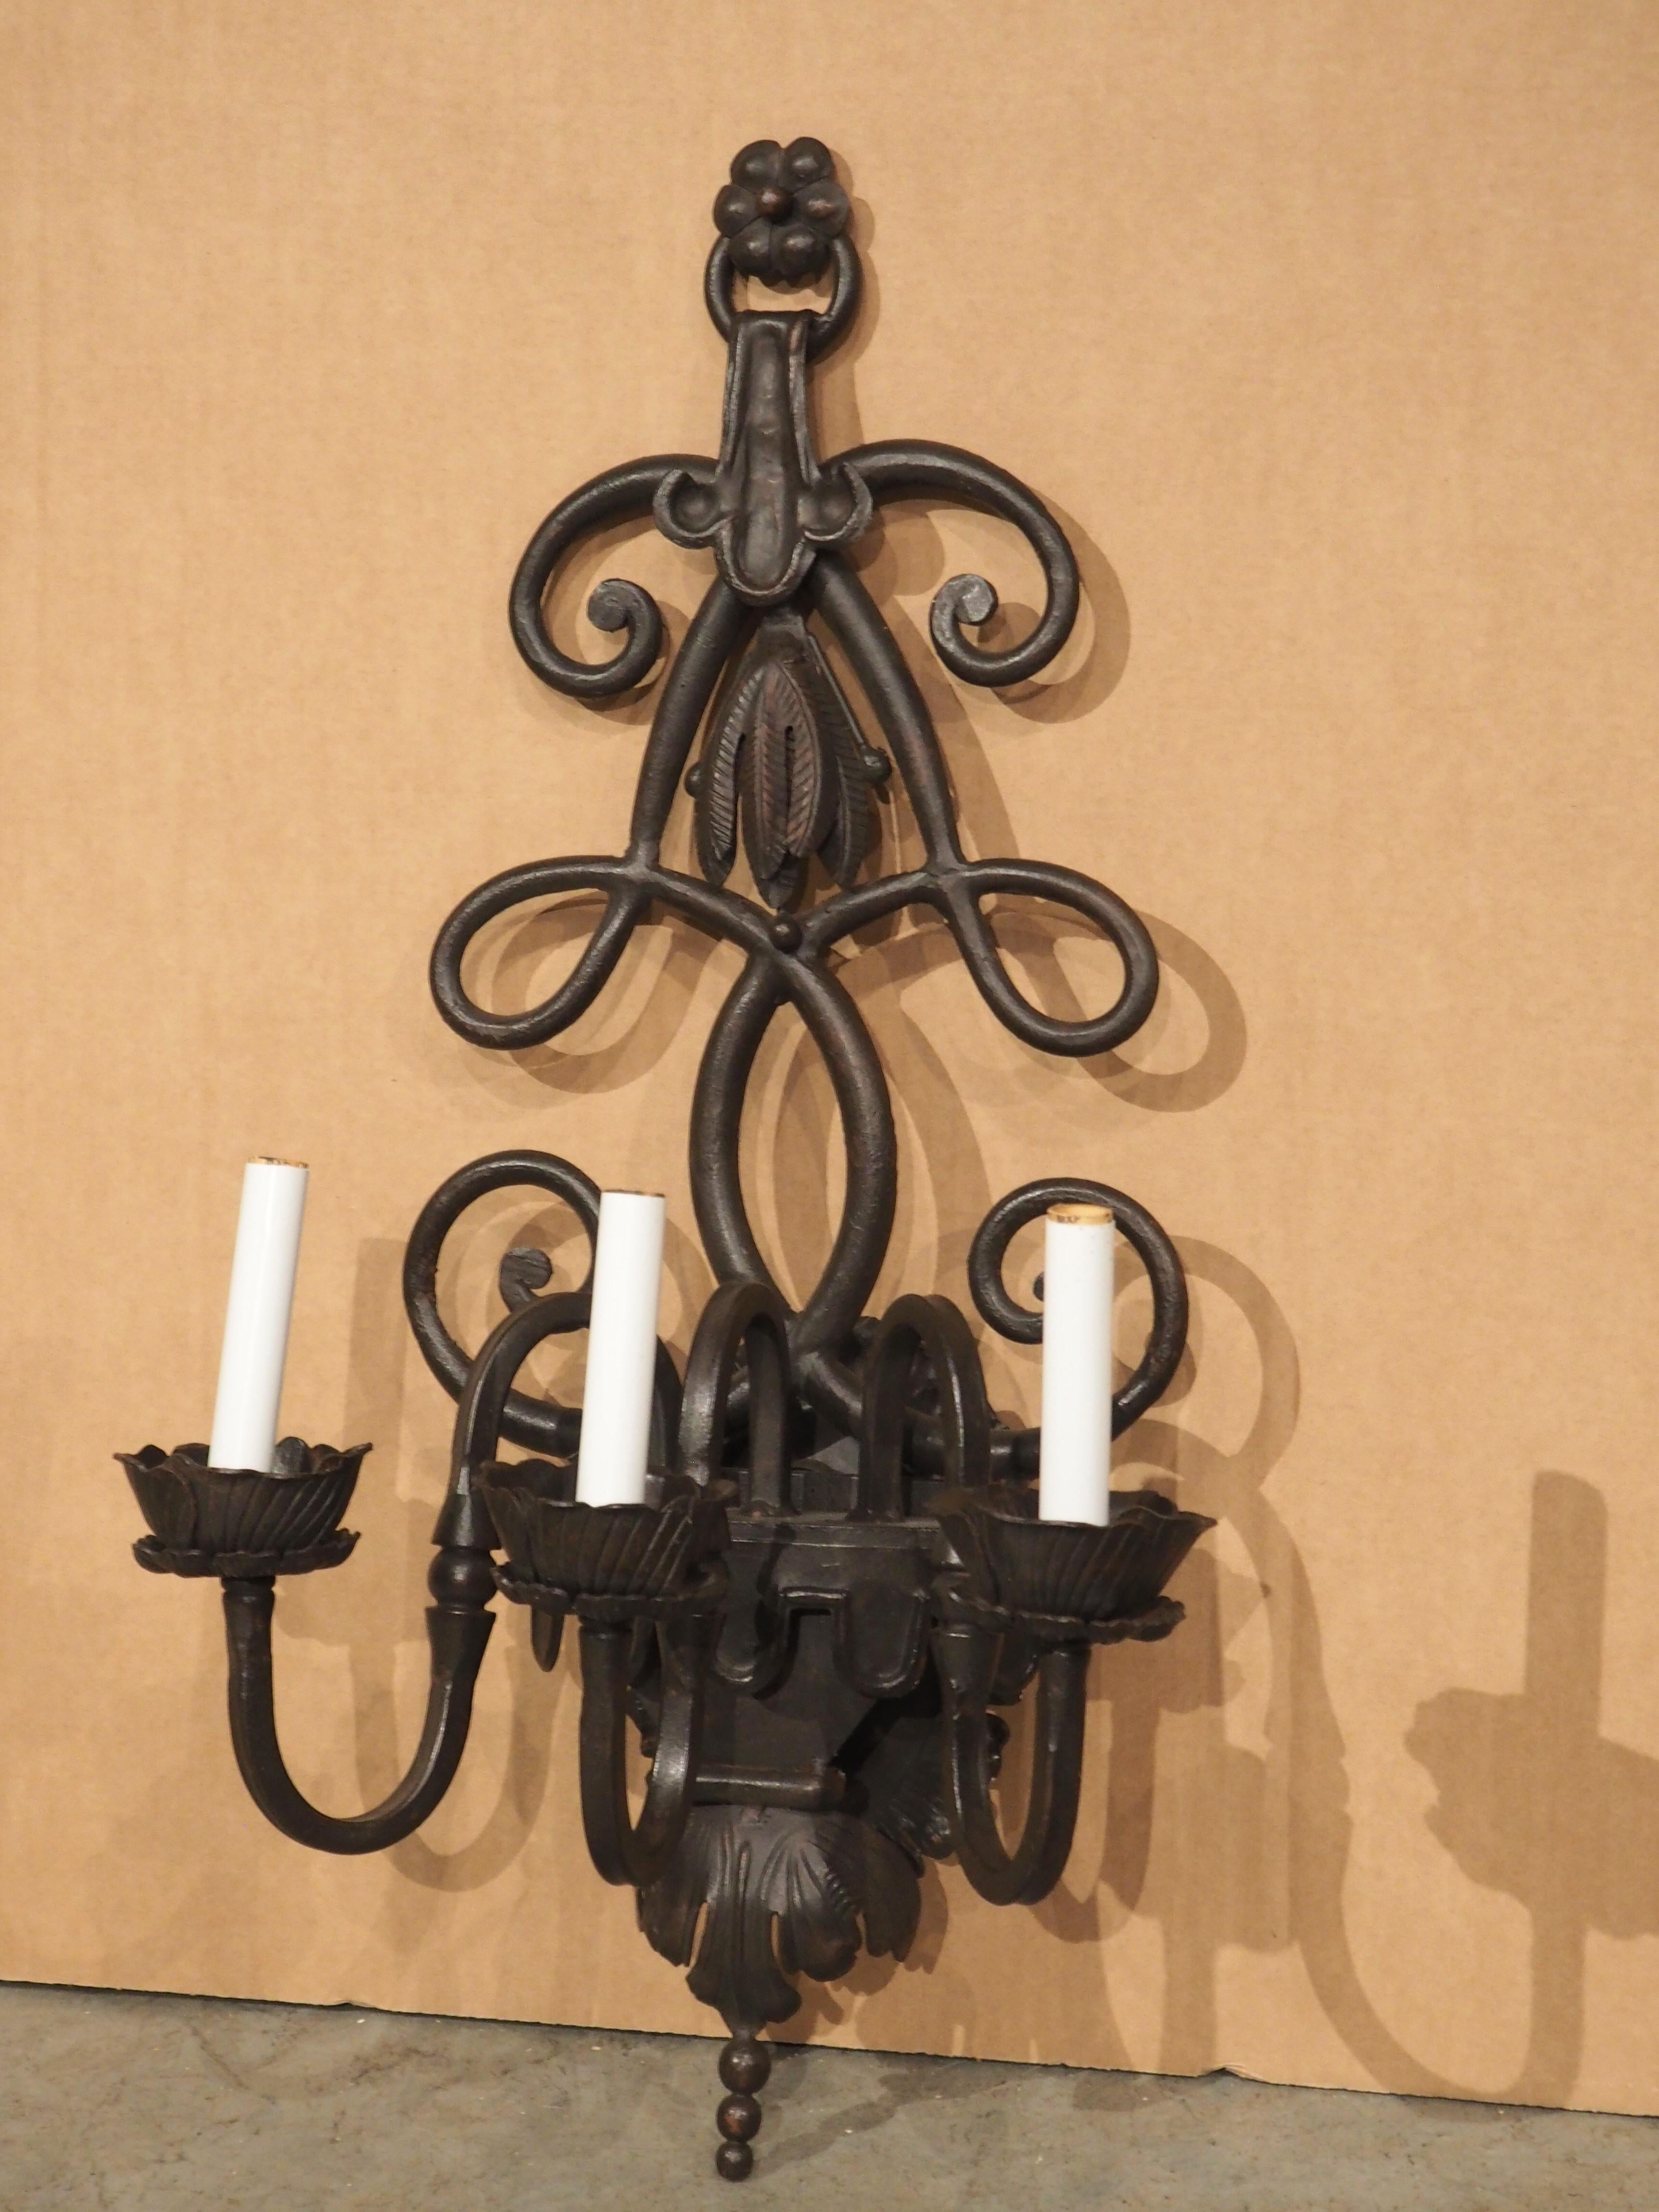 Wrought in the style of Spanish architectural lighting, this iron three-arm wall sconce is topped by white faux candle sleeves rising from saucer bobeches. Each arm has a sinuous S-scroll shape, with a roundel knop transition point. They originate